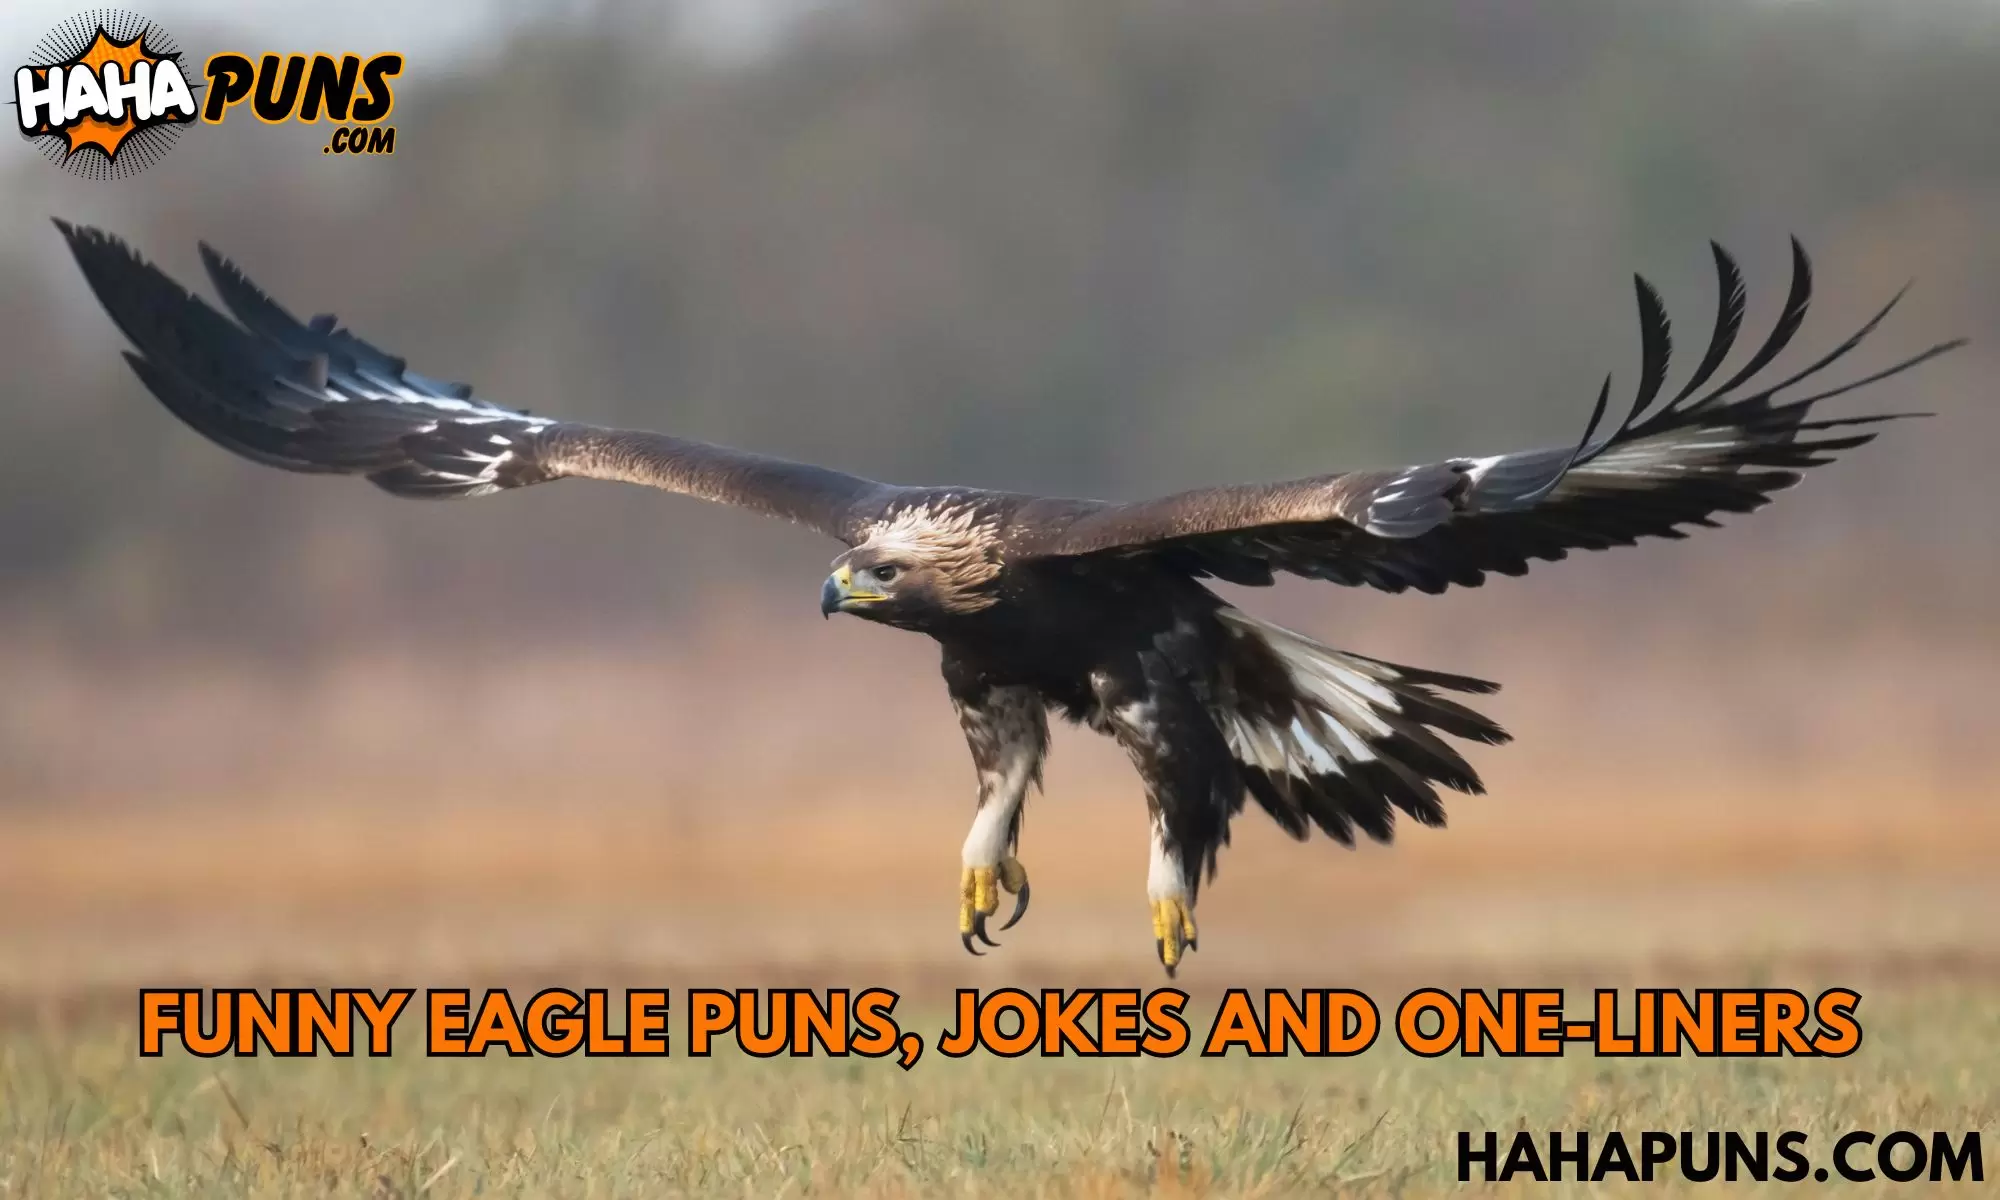 Funny Eagle Puns, Jokes And One-Liners